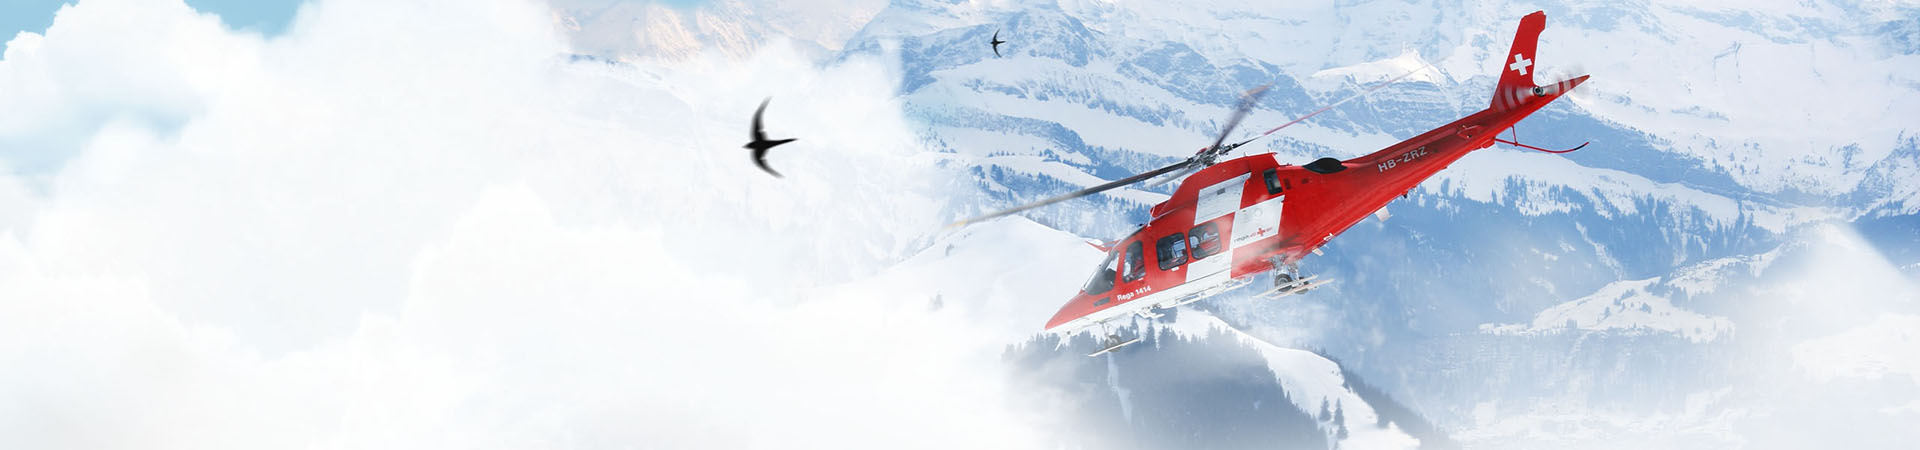 Astrum Assistance Alliance AG's air ambulance providing medical assistance in the mountains